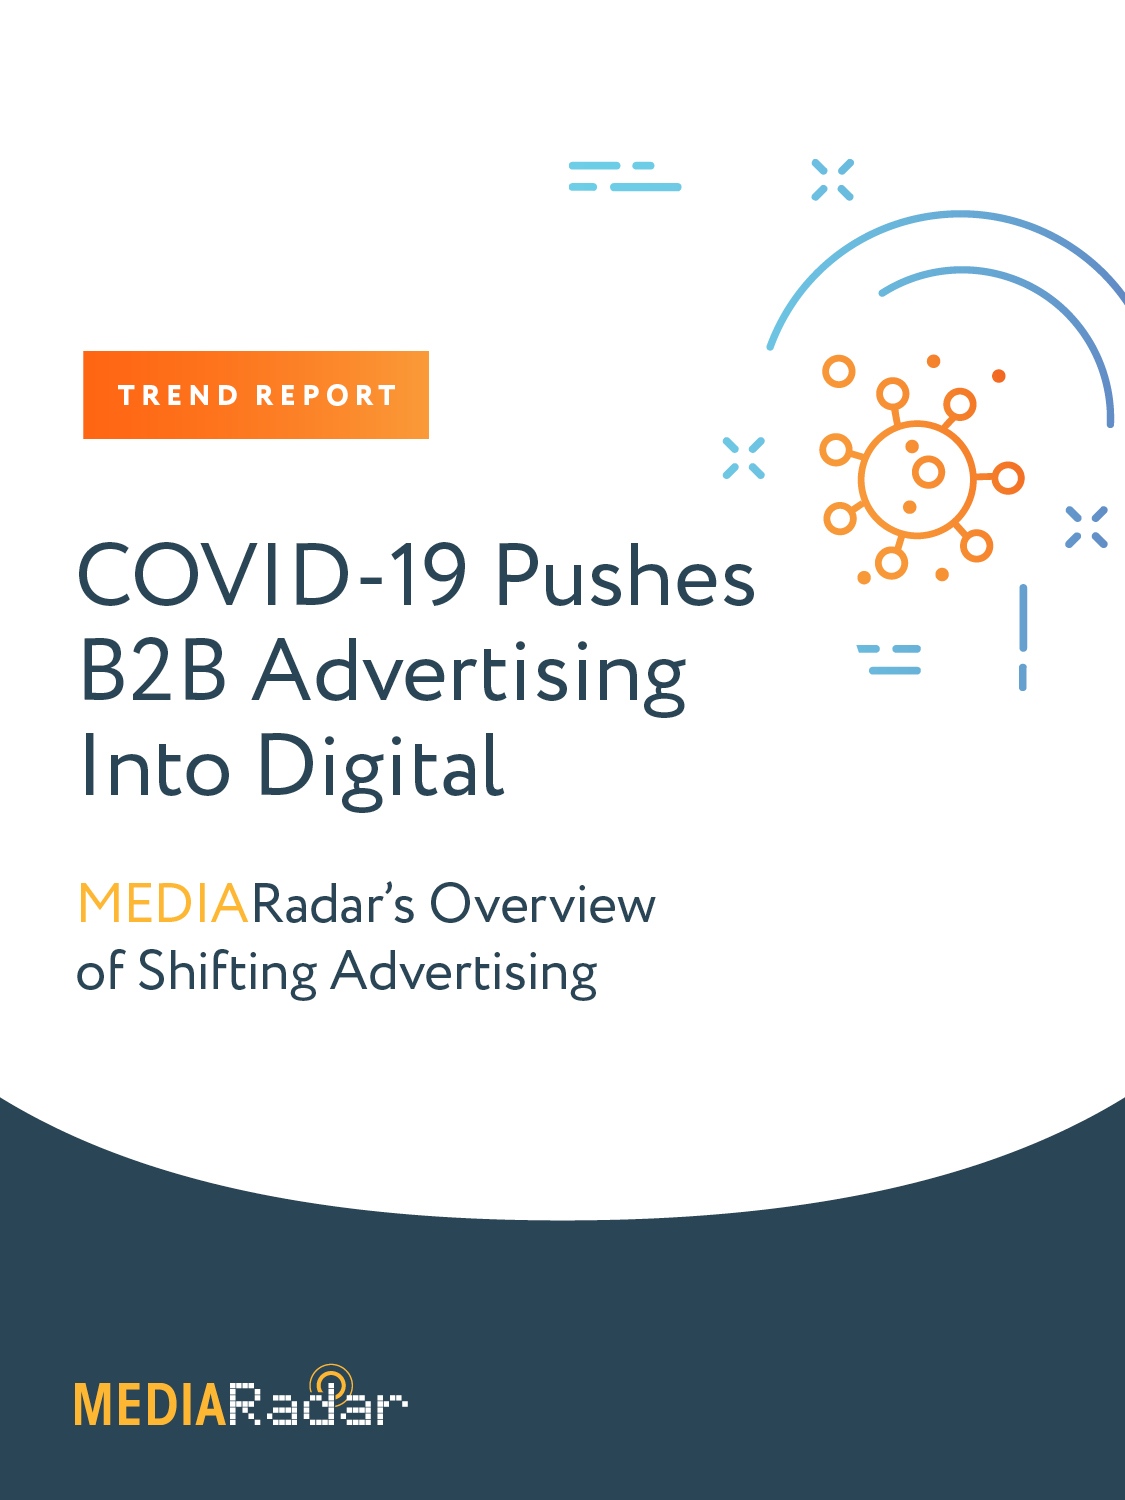 COVID-19 Pushes B2B Advertising into Digital Trend Report